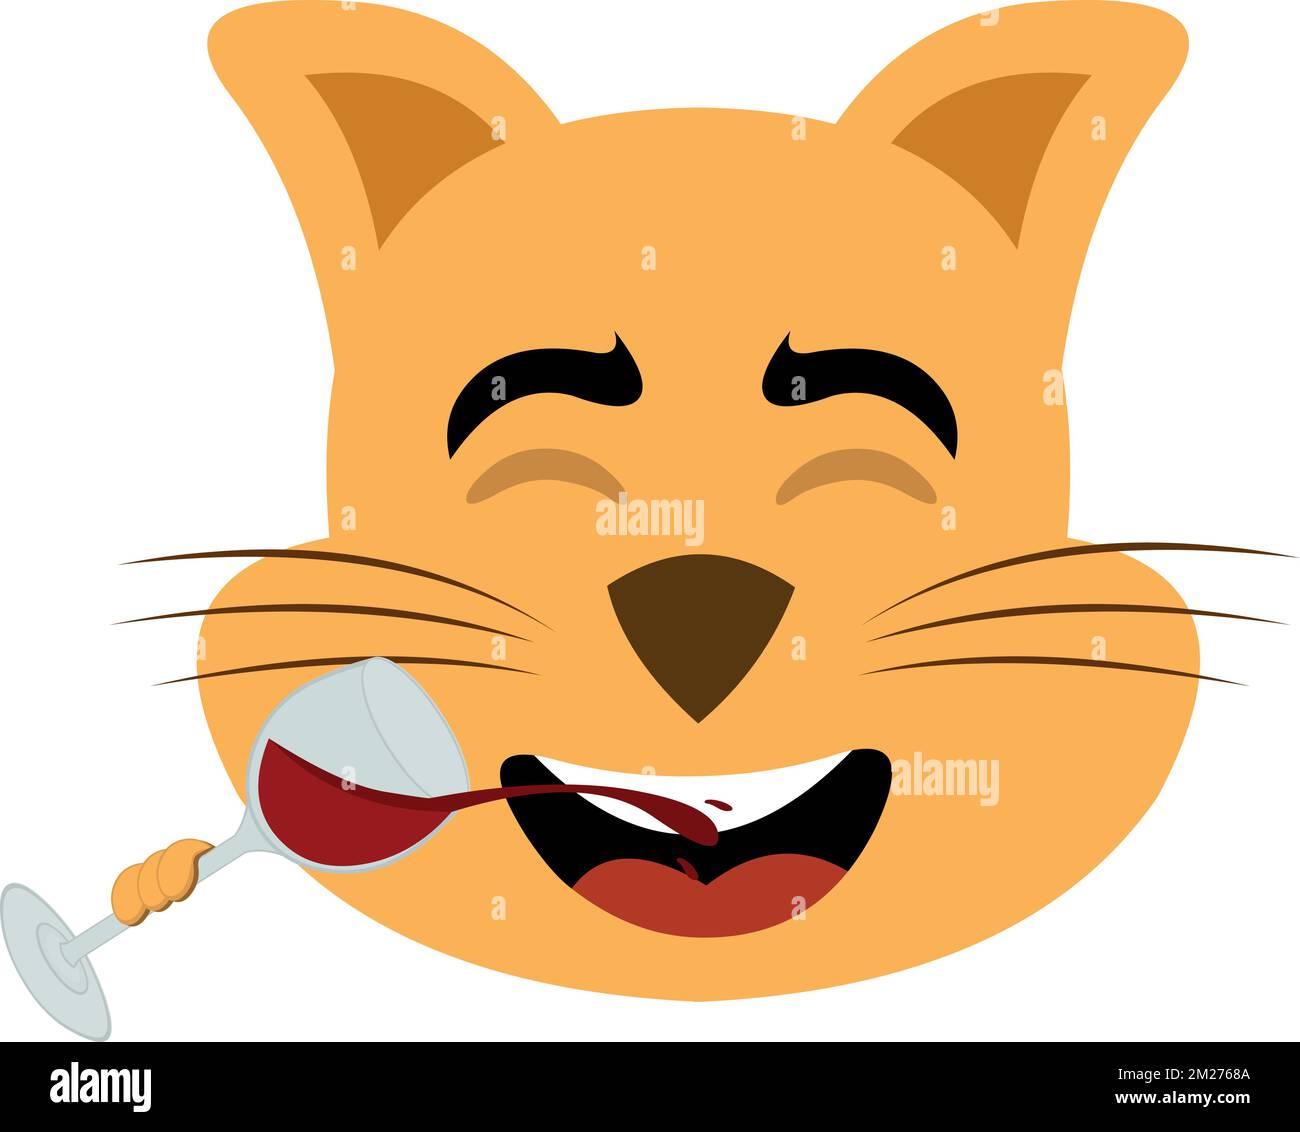 vector illustration of the face of a cartoon cat drinking a glass of wine Stock Vector